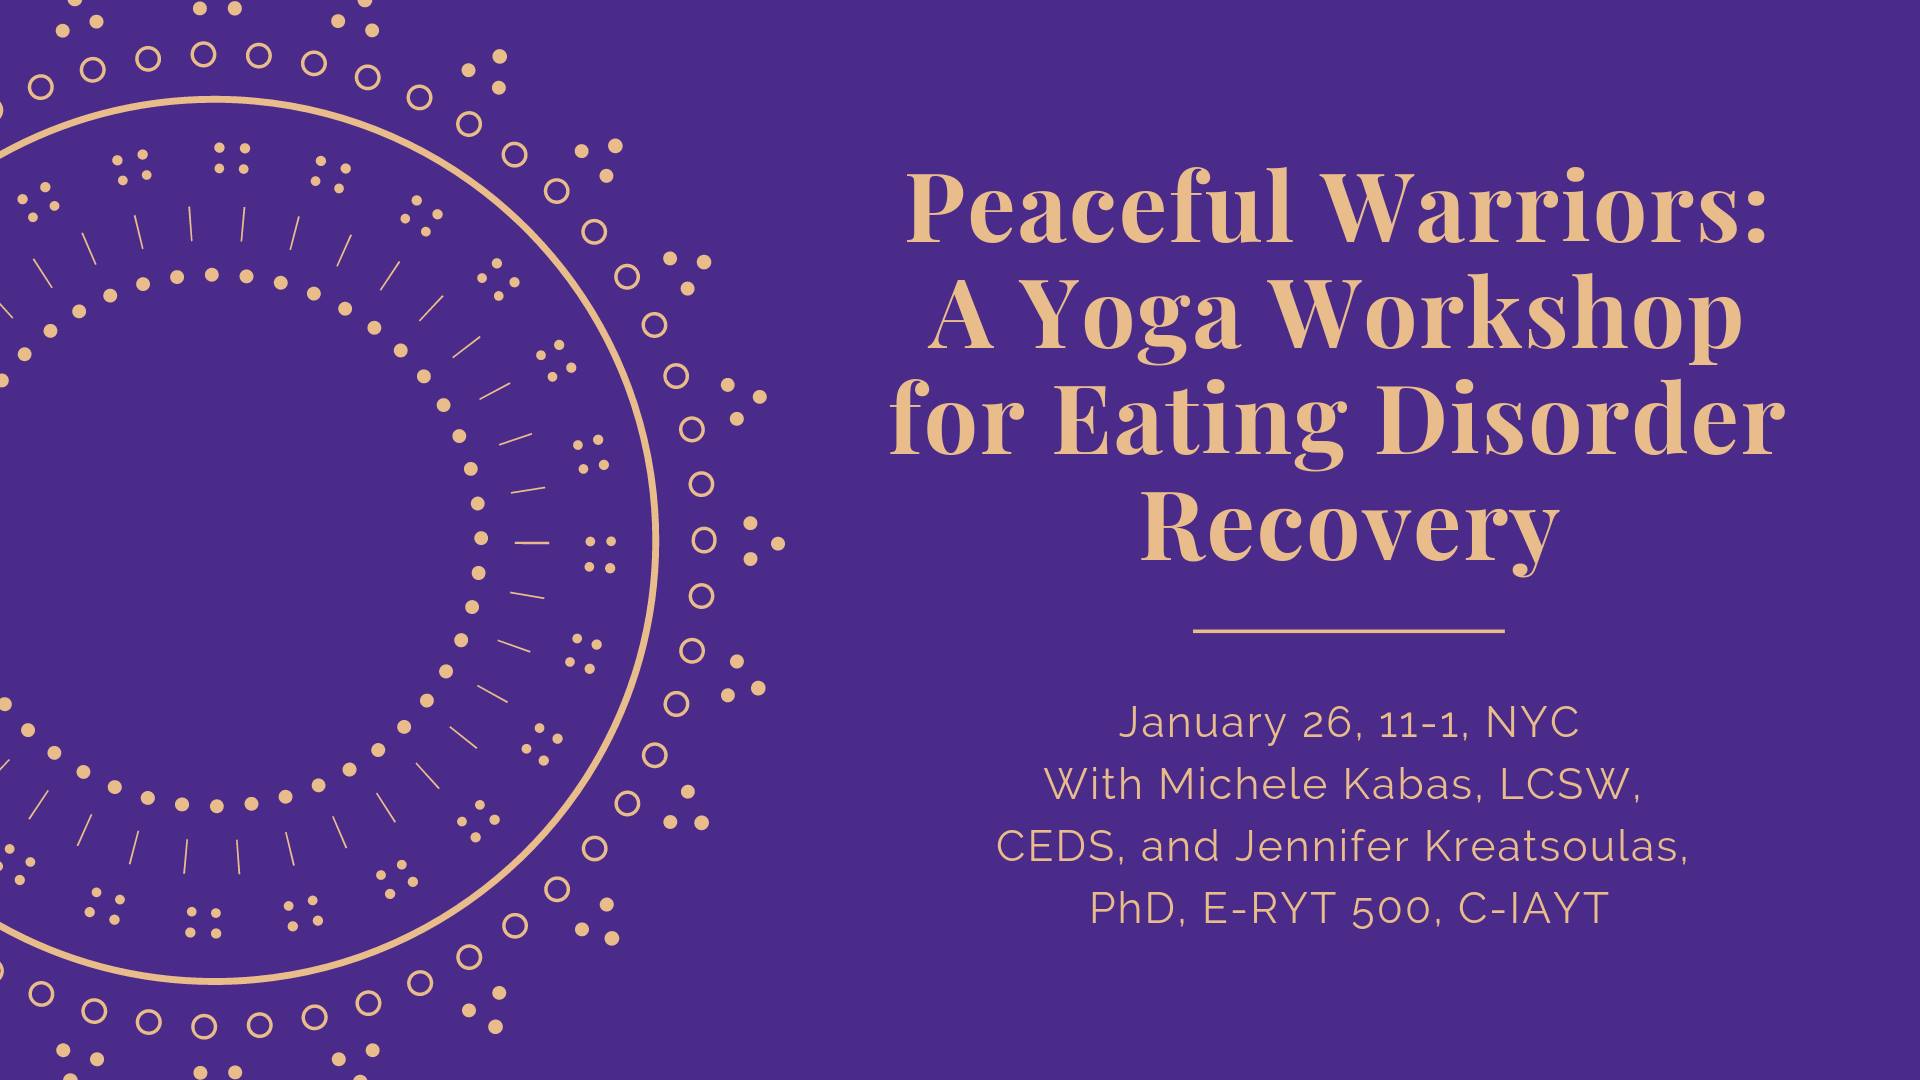 Peaceful Warriors: A Yoga Workshop for Eating Disorder Recovery